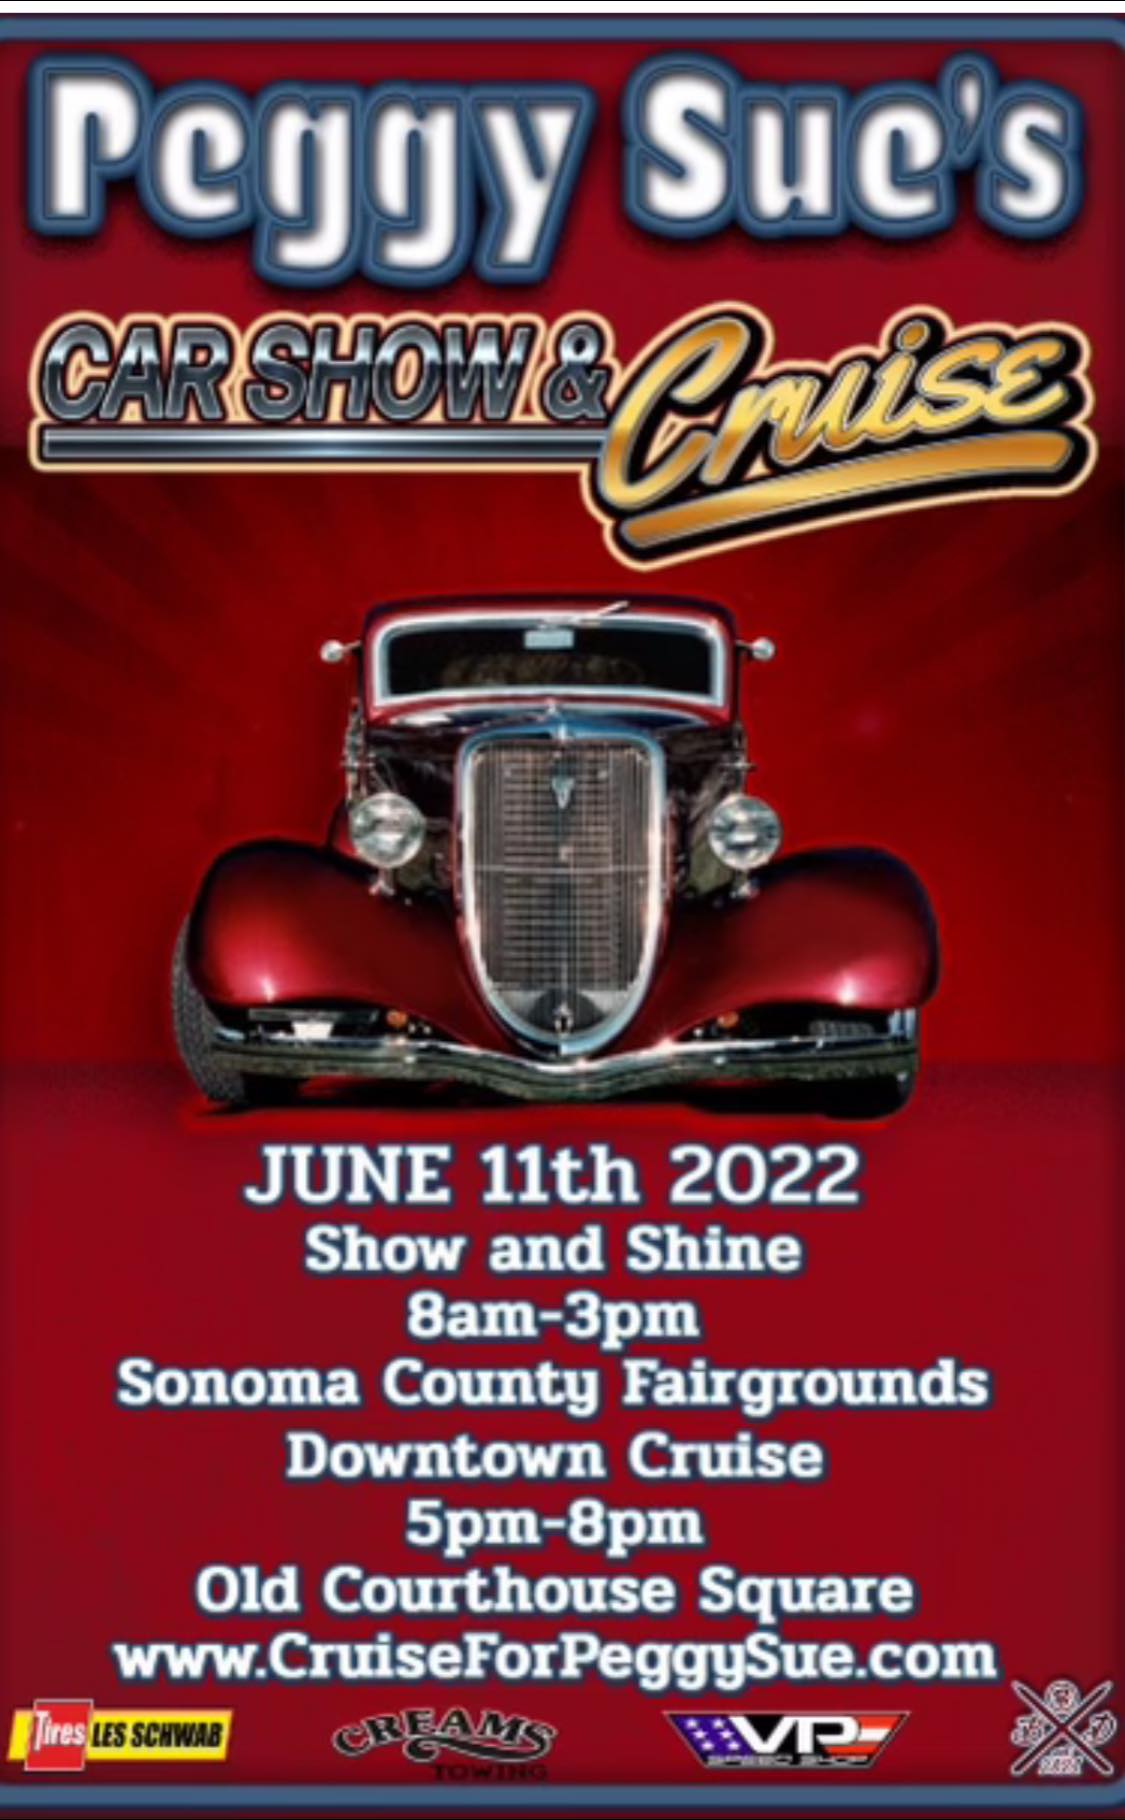 Peggy Sue’s Car Show and Cruise